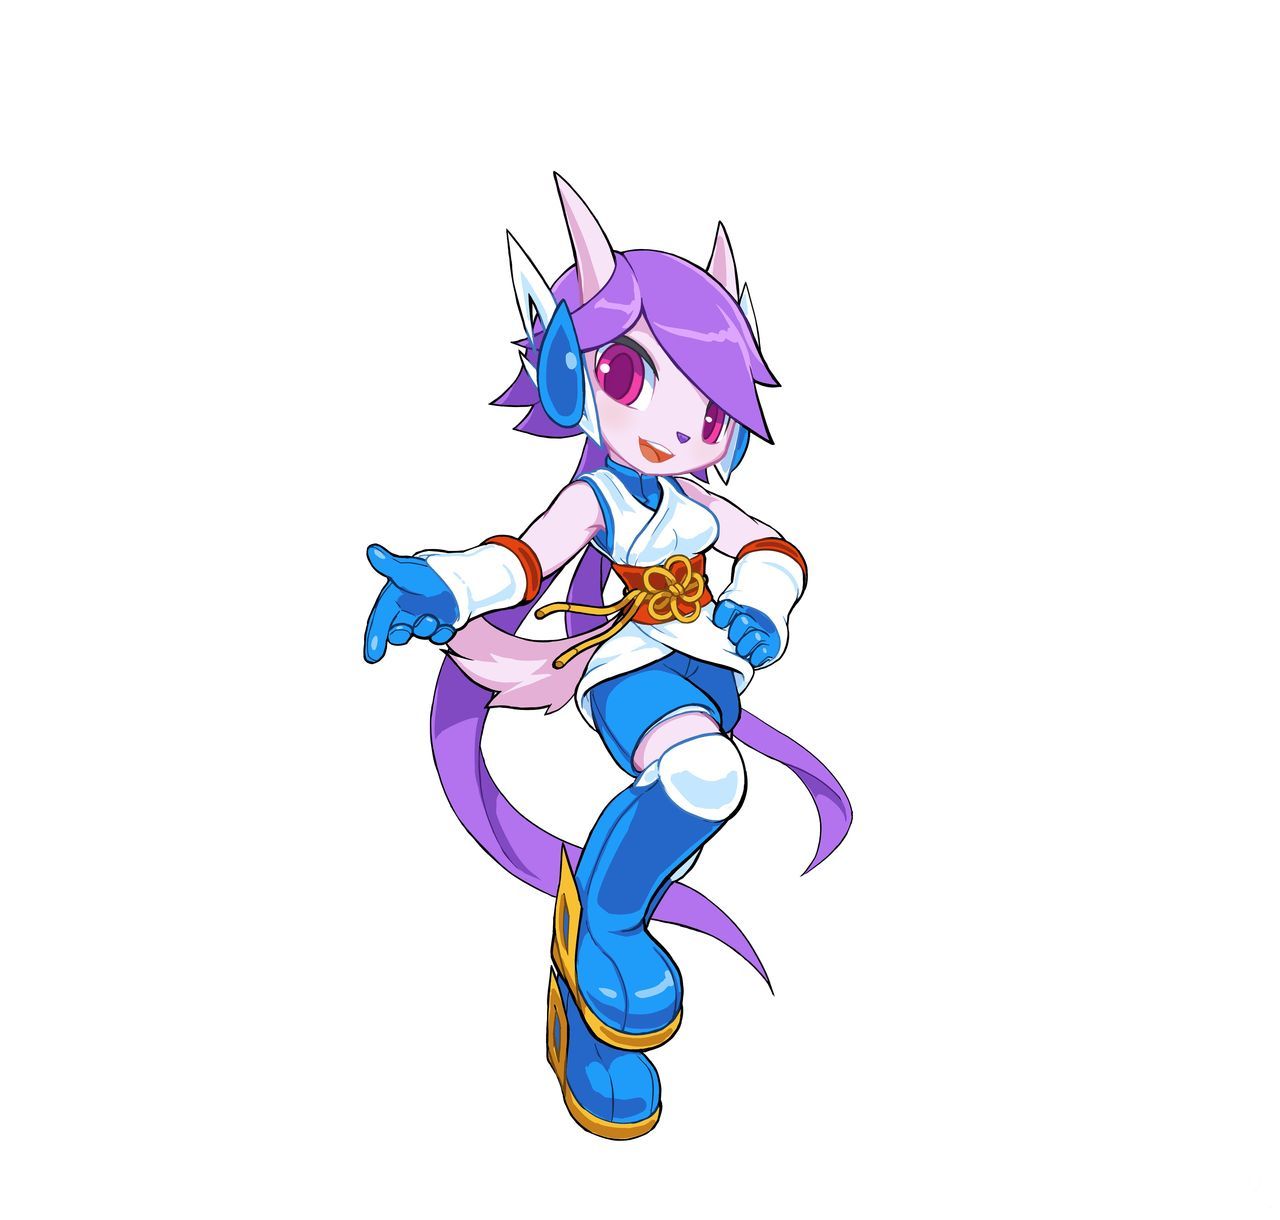 download freedom planet 2 ps5